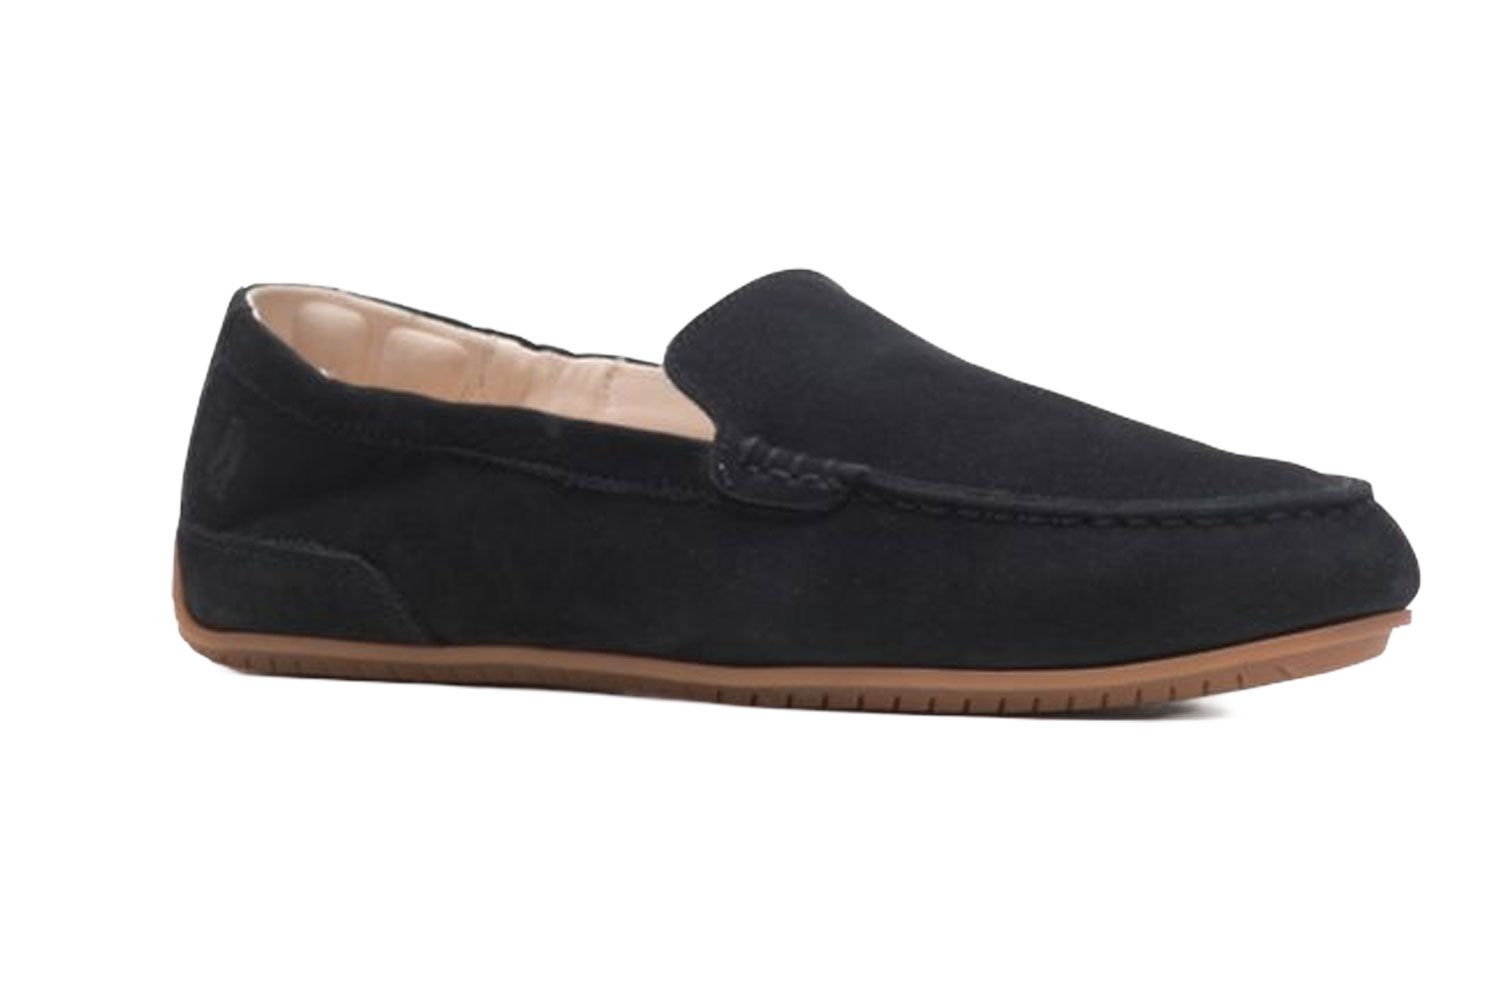 Hush Puppies Loafers